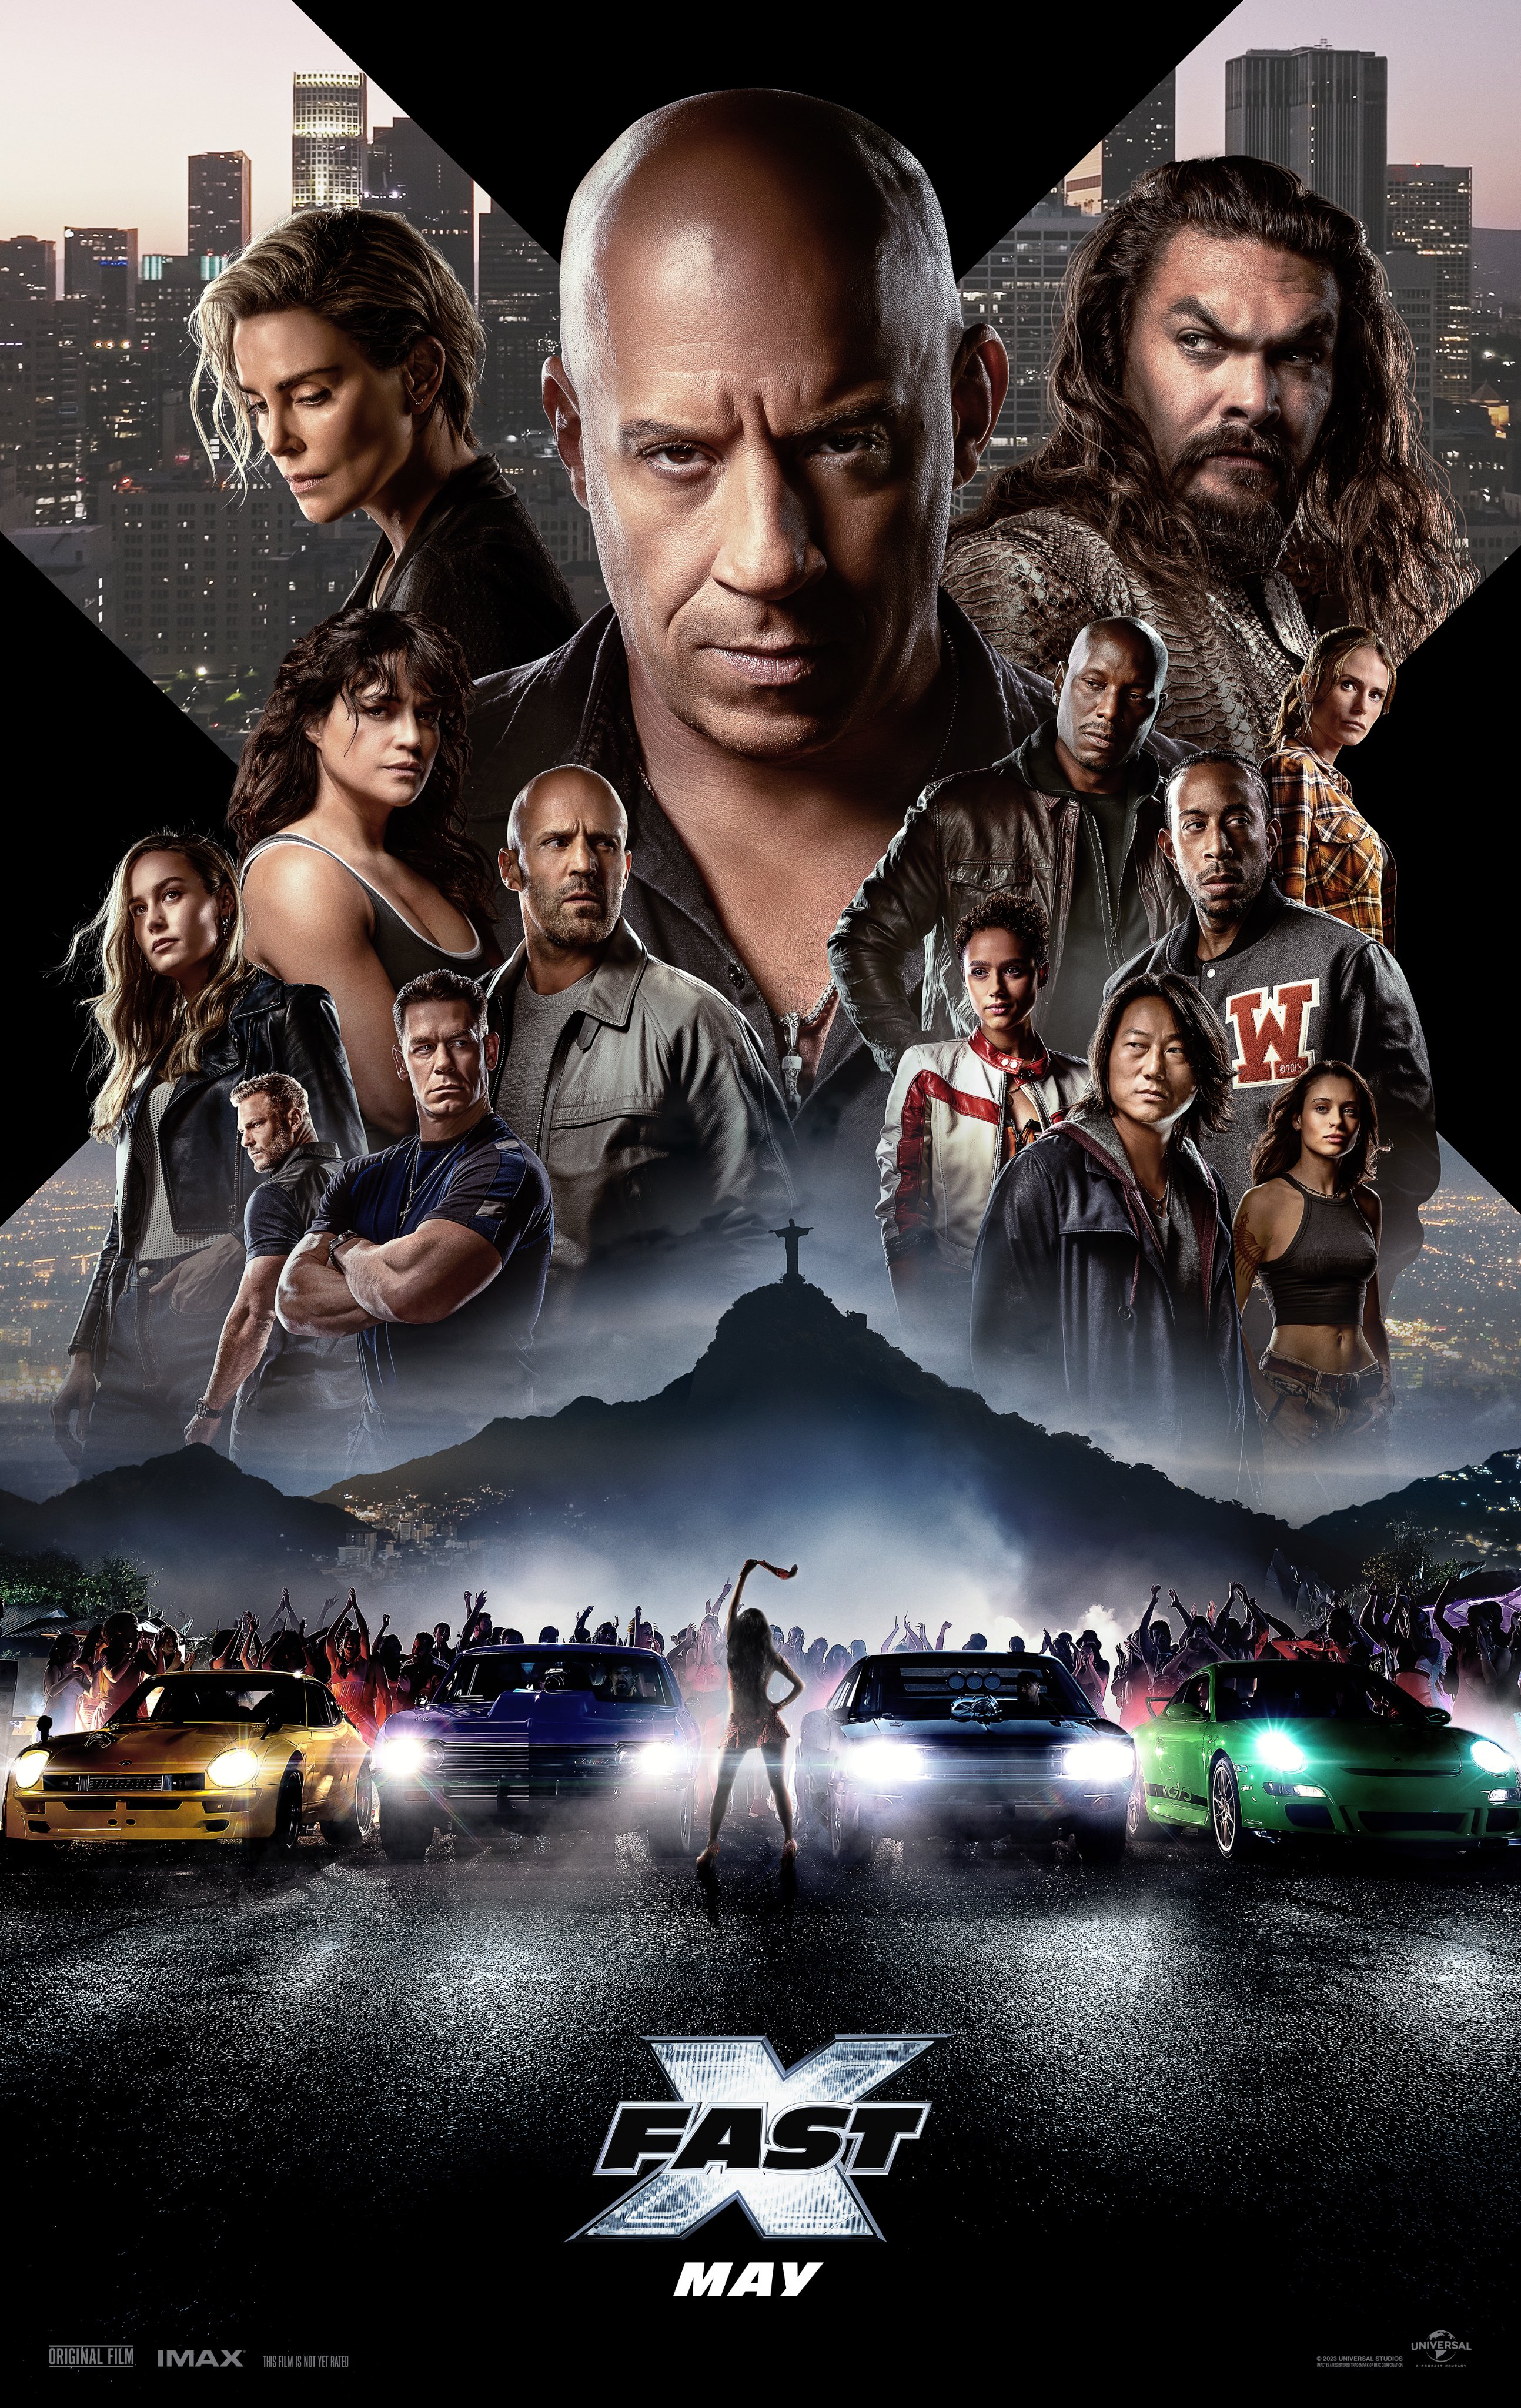 https://static.wikia.nocookie.net/fastandfurious/images/d/da/Fast_X_Theatrical_Poster.jpg/revision/latest?cb=20230314161114